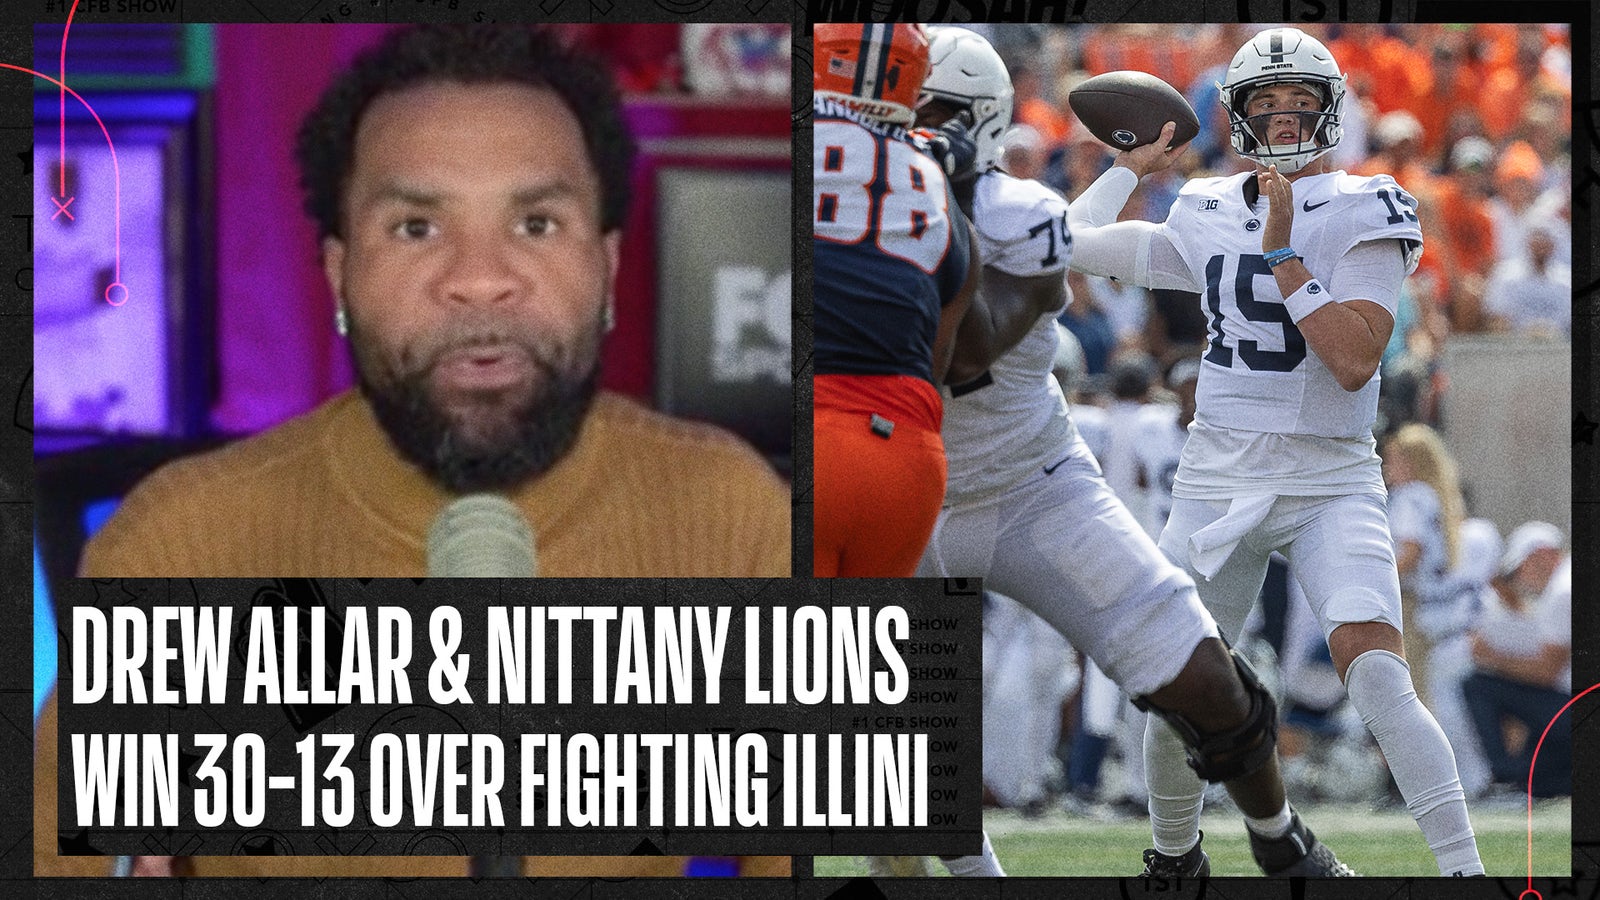 RJ Young breaks down Penn State's 30-13 win over Illinois